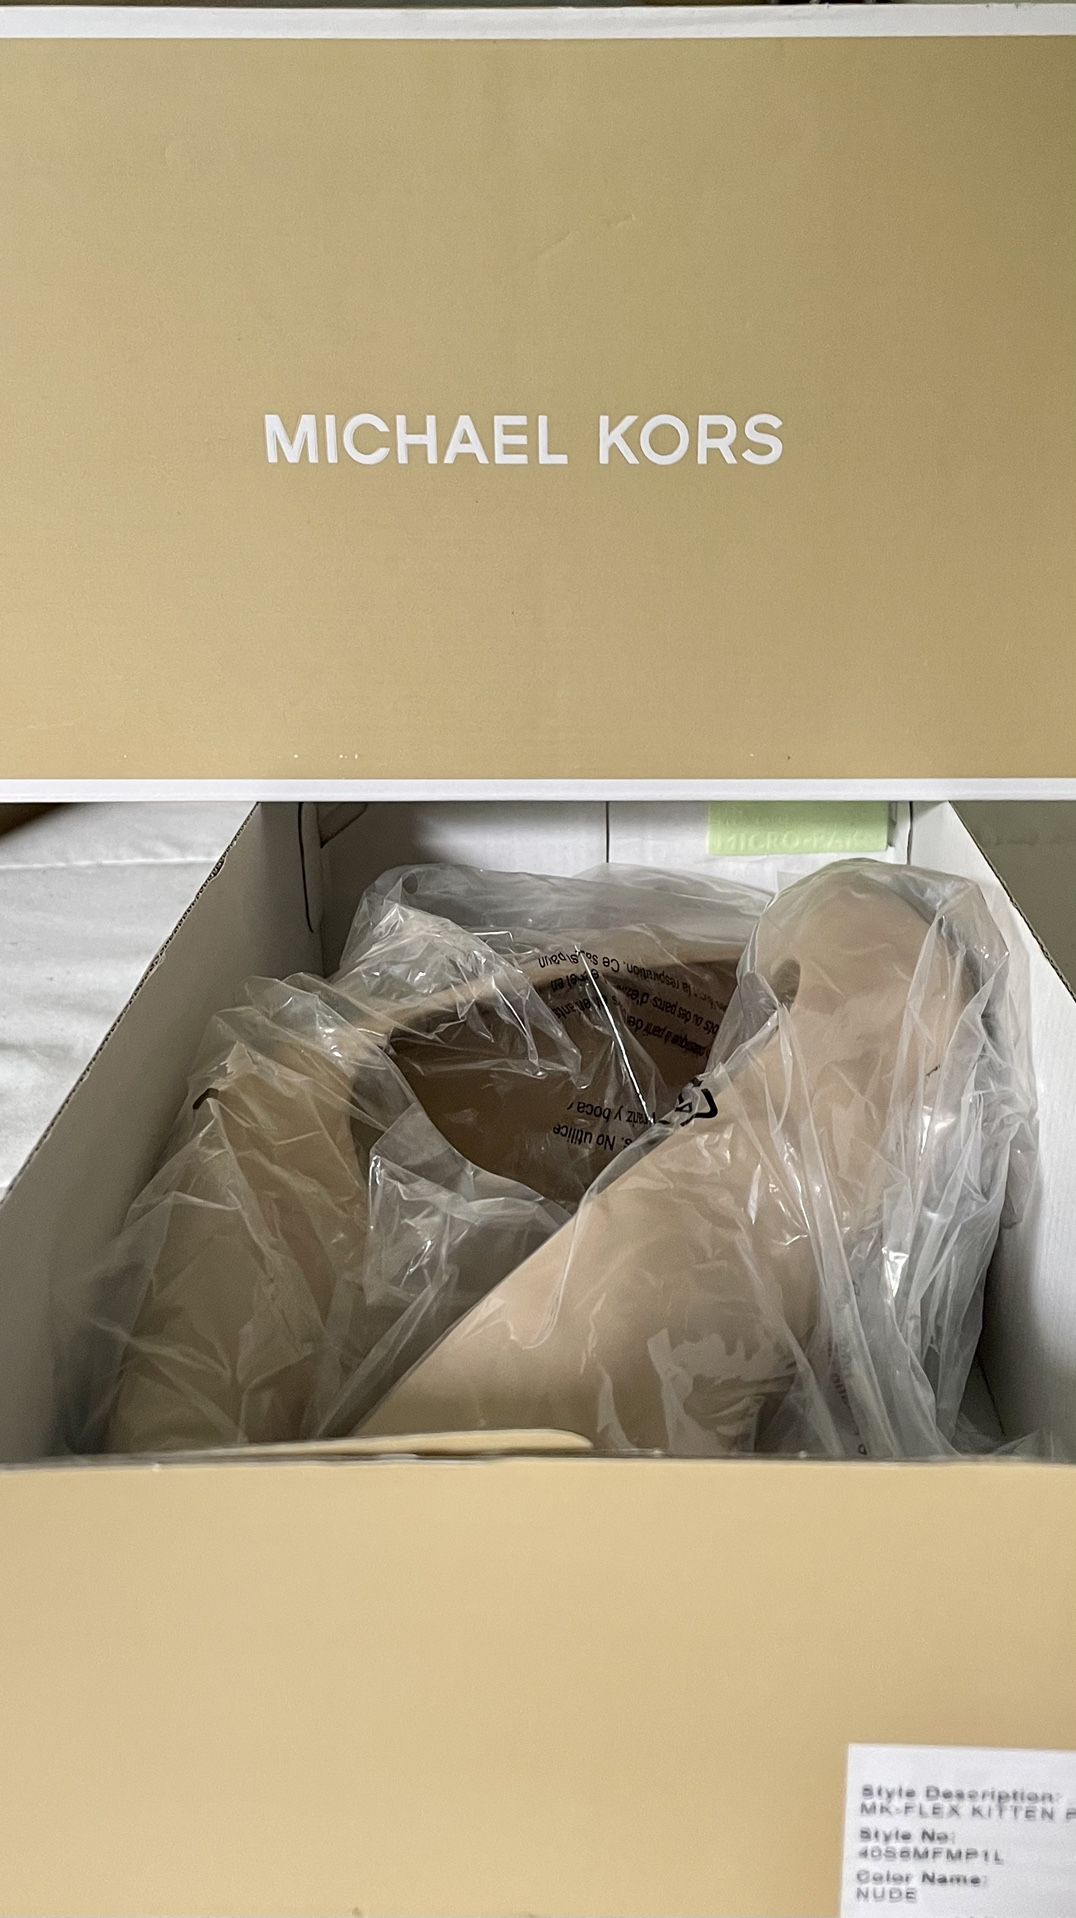 Michael Kors Shoes - BUY ONE GET ONE FREE!!!